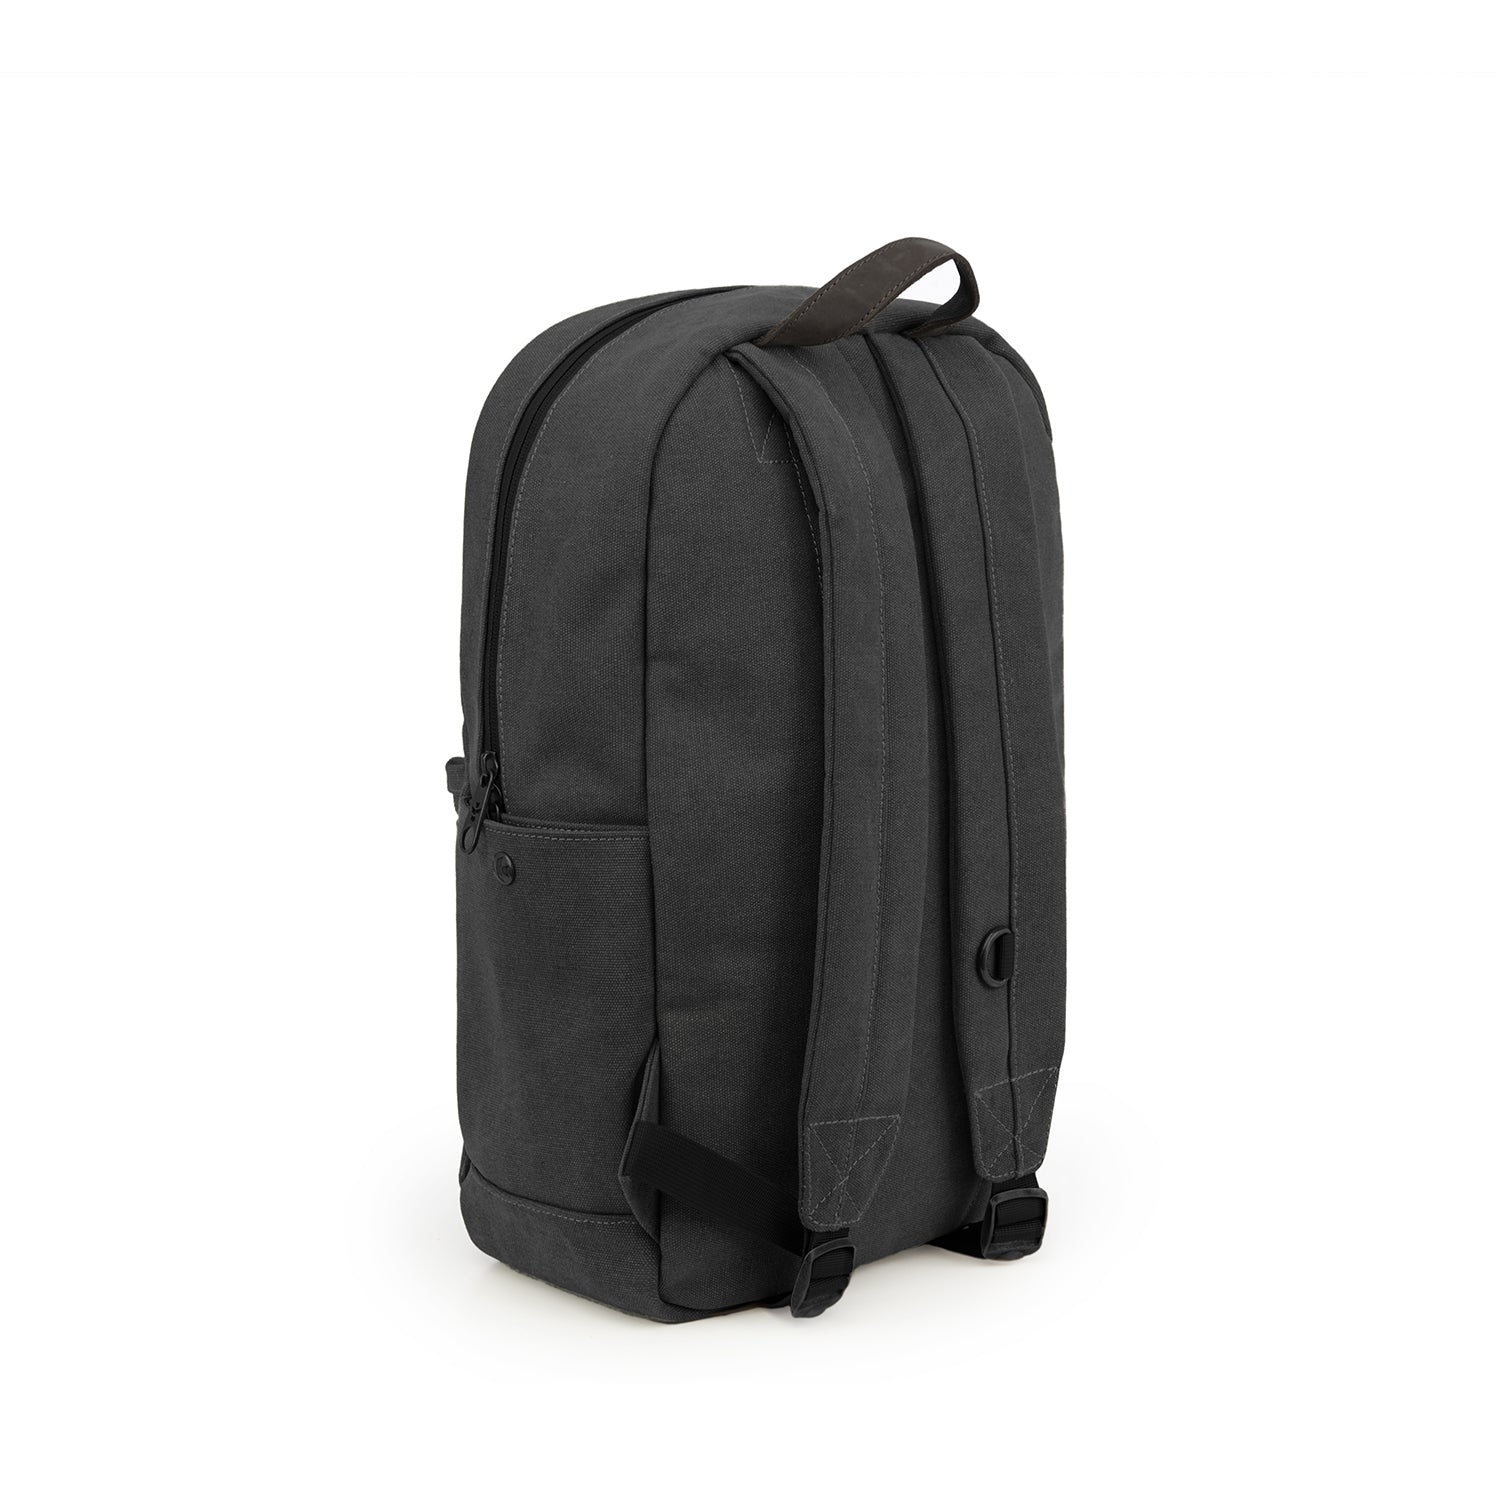 Smoke Canvas Smell Proof Water Resistant Backpack Bag